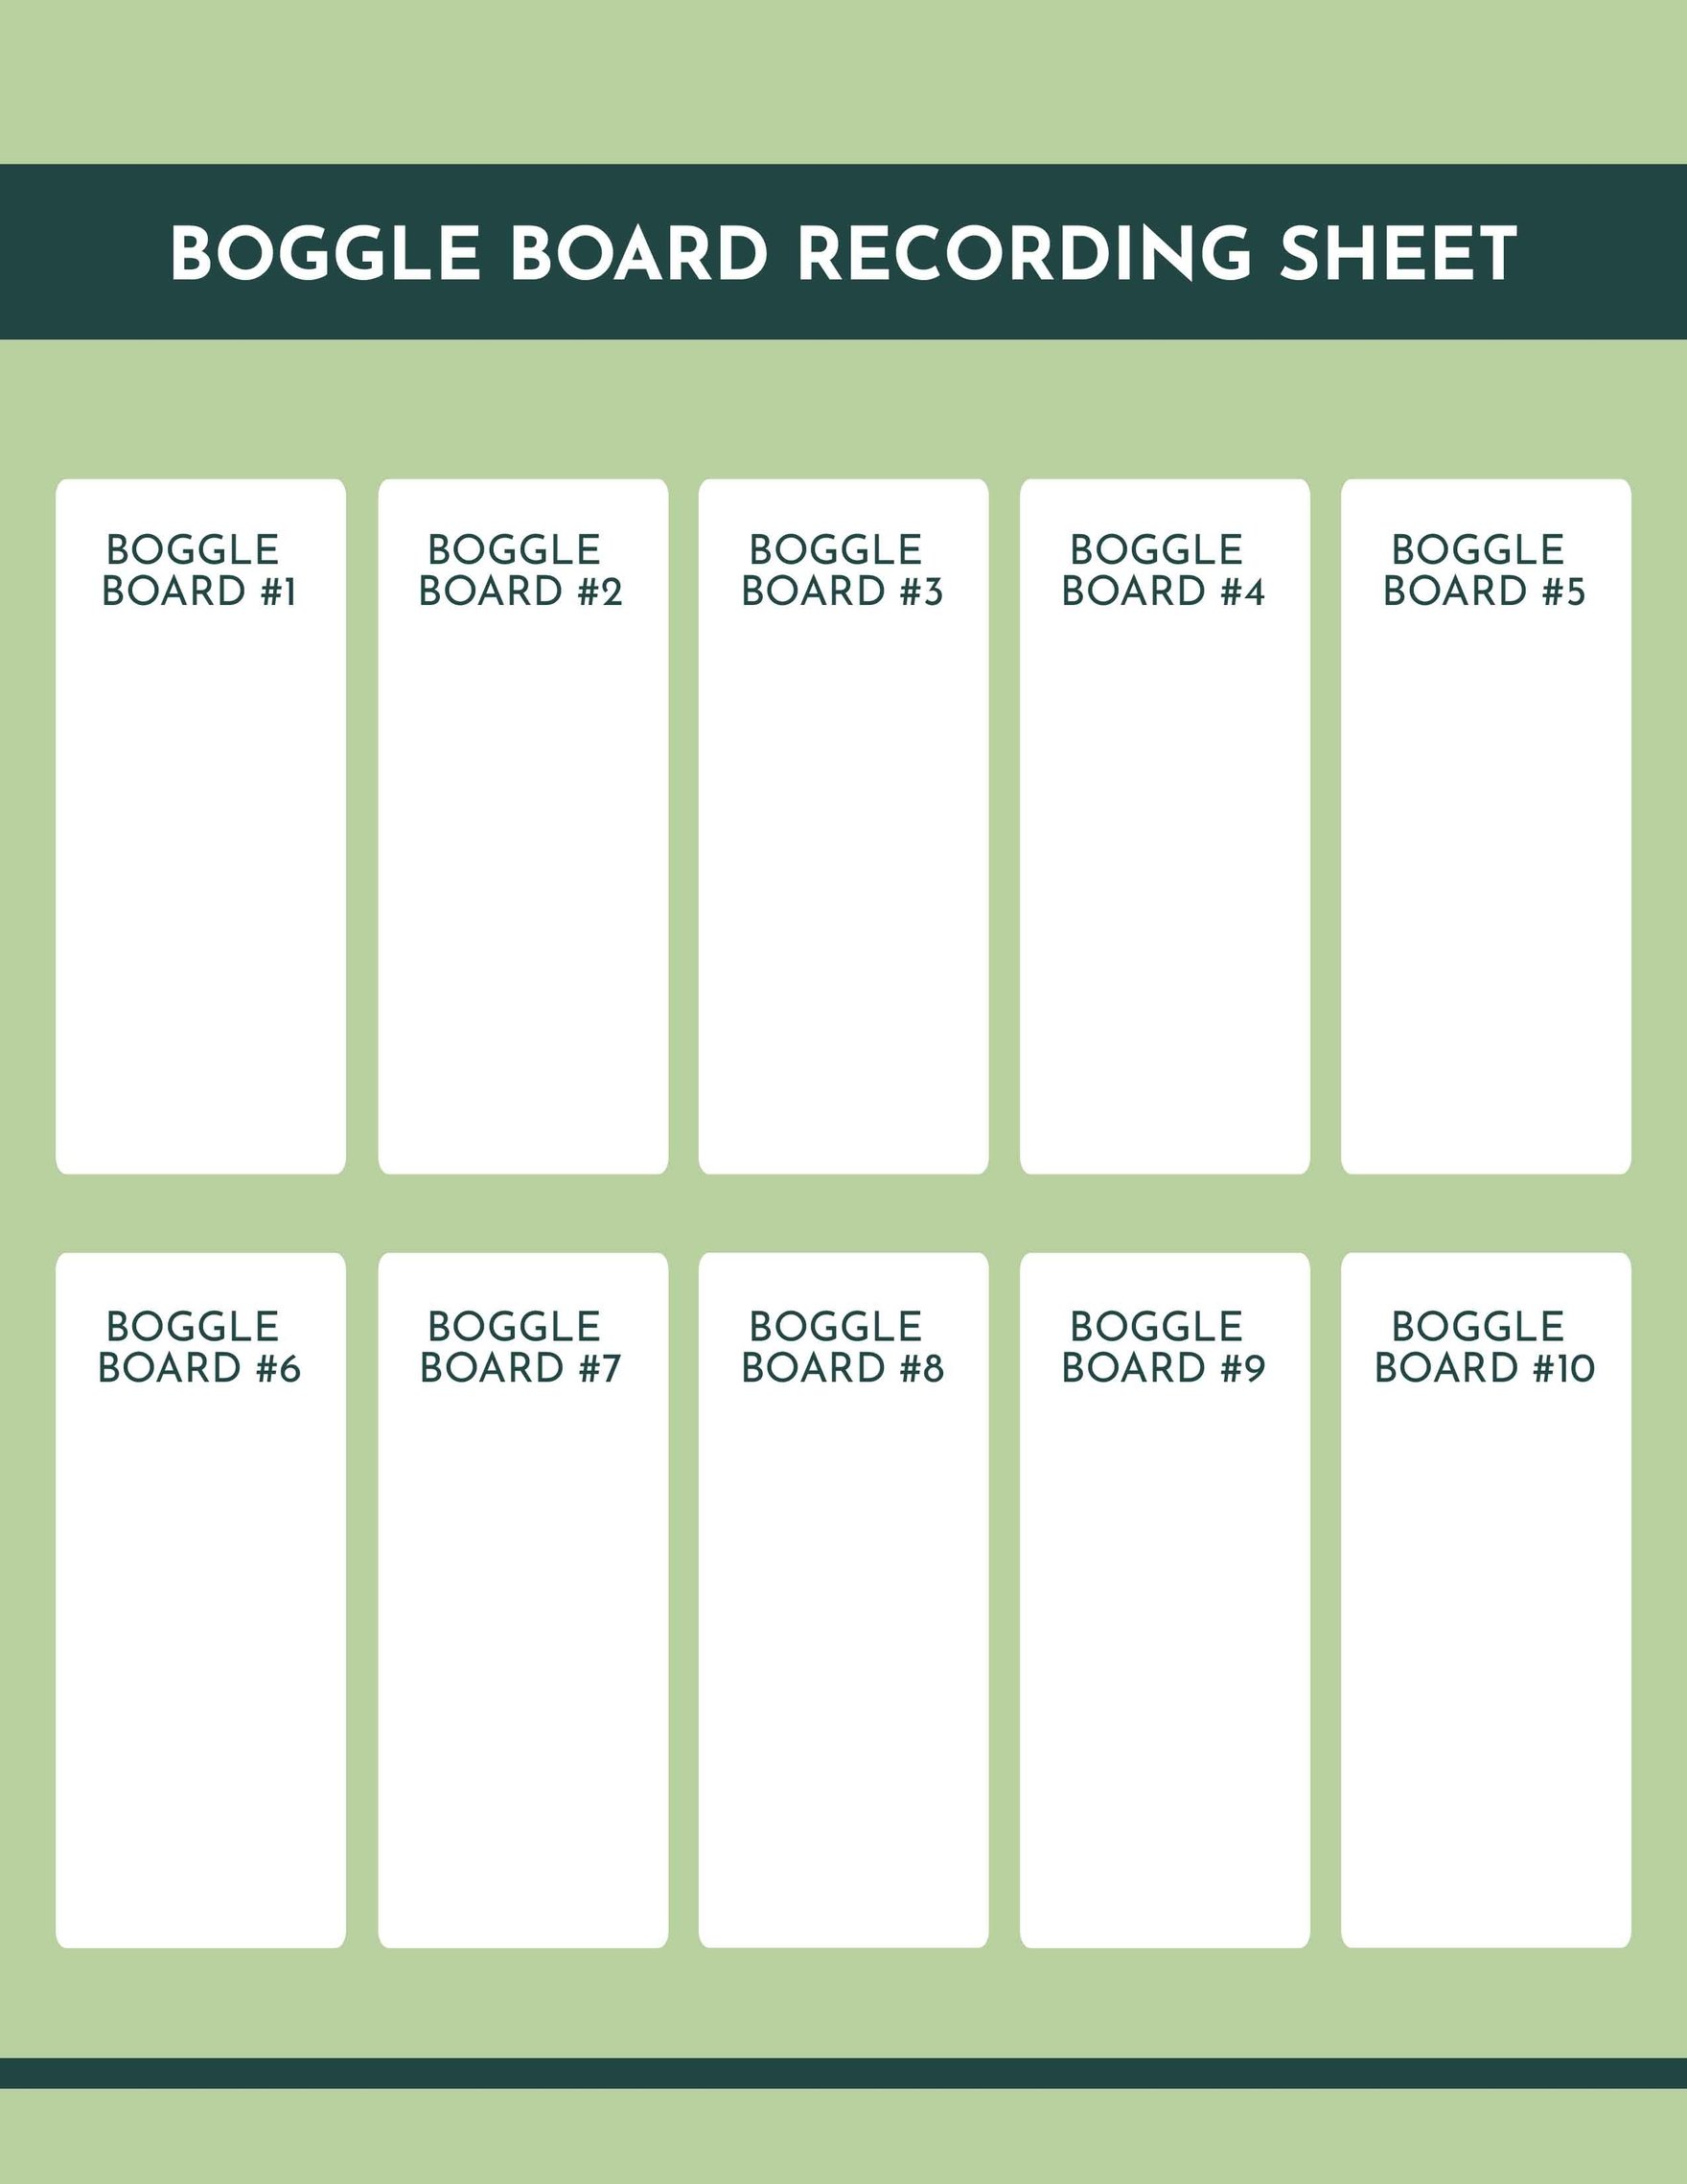 Boggle Board Recording Sheet Template in Word, Google Docs, PDF, Apple Pages